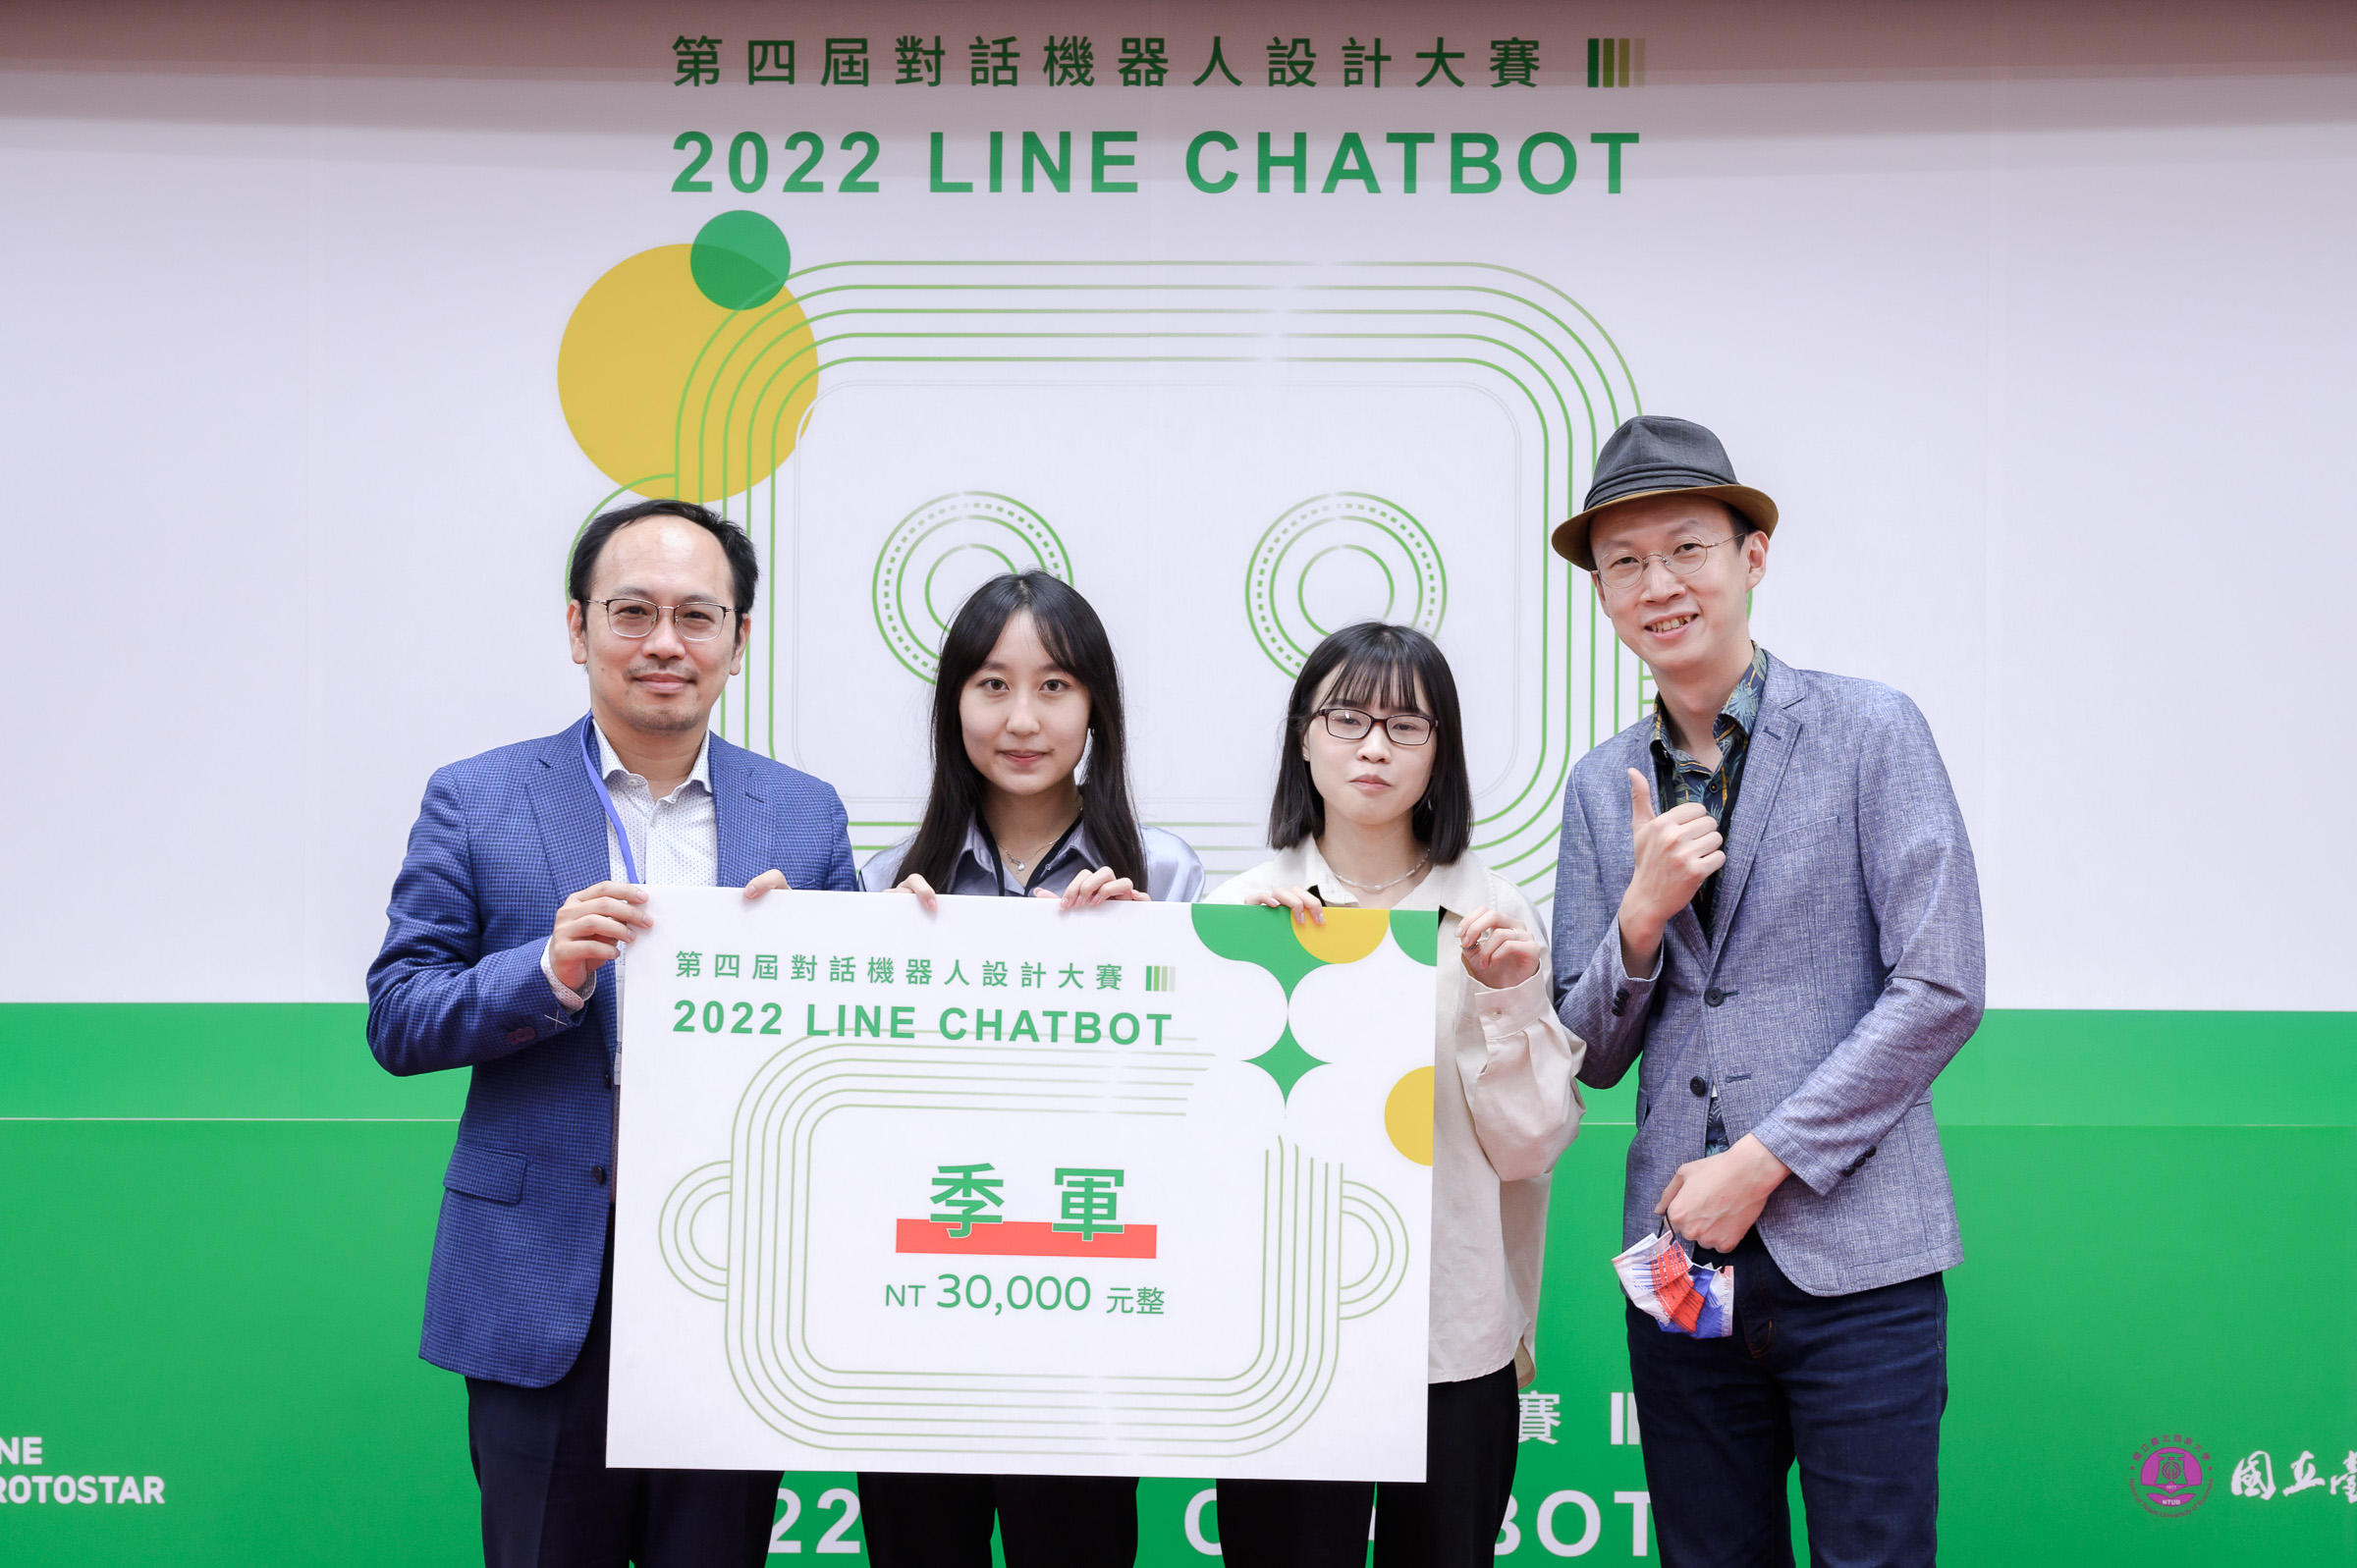 YZU wins the second runner-up in the 2022 LINE CHATBOT Competition